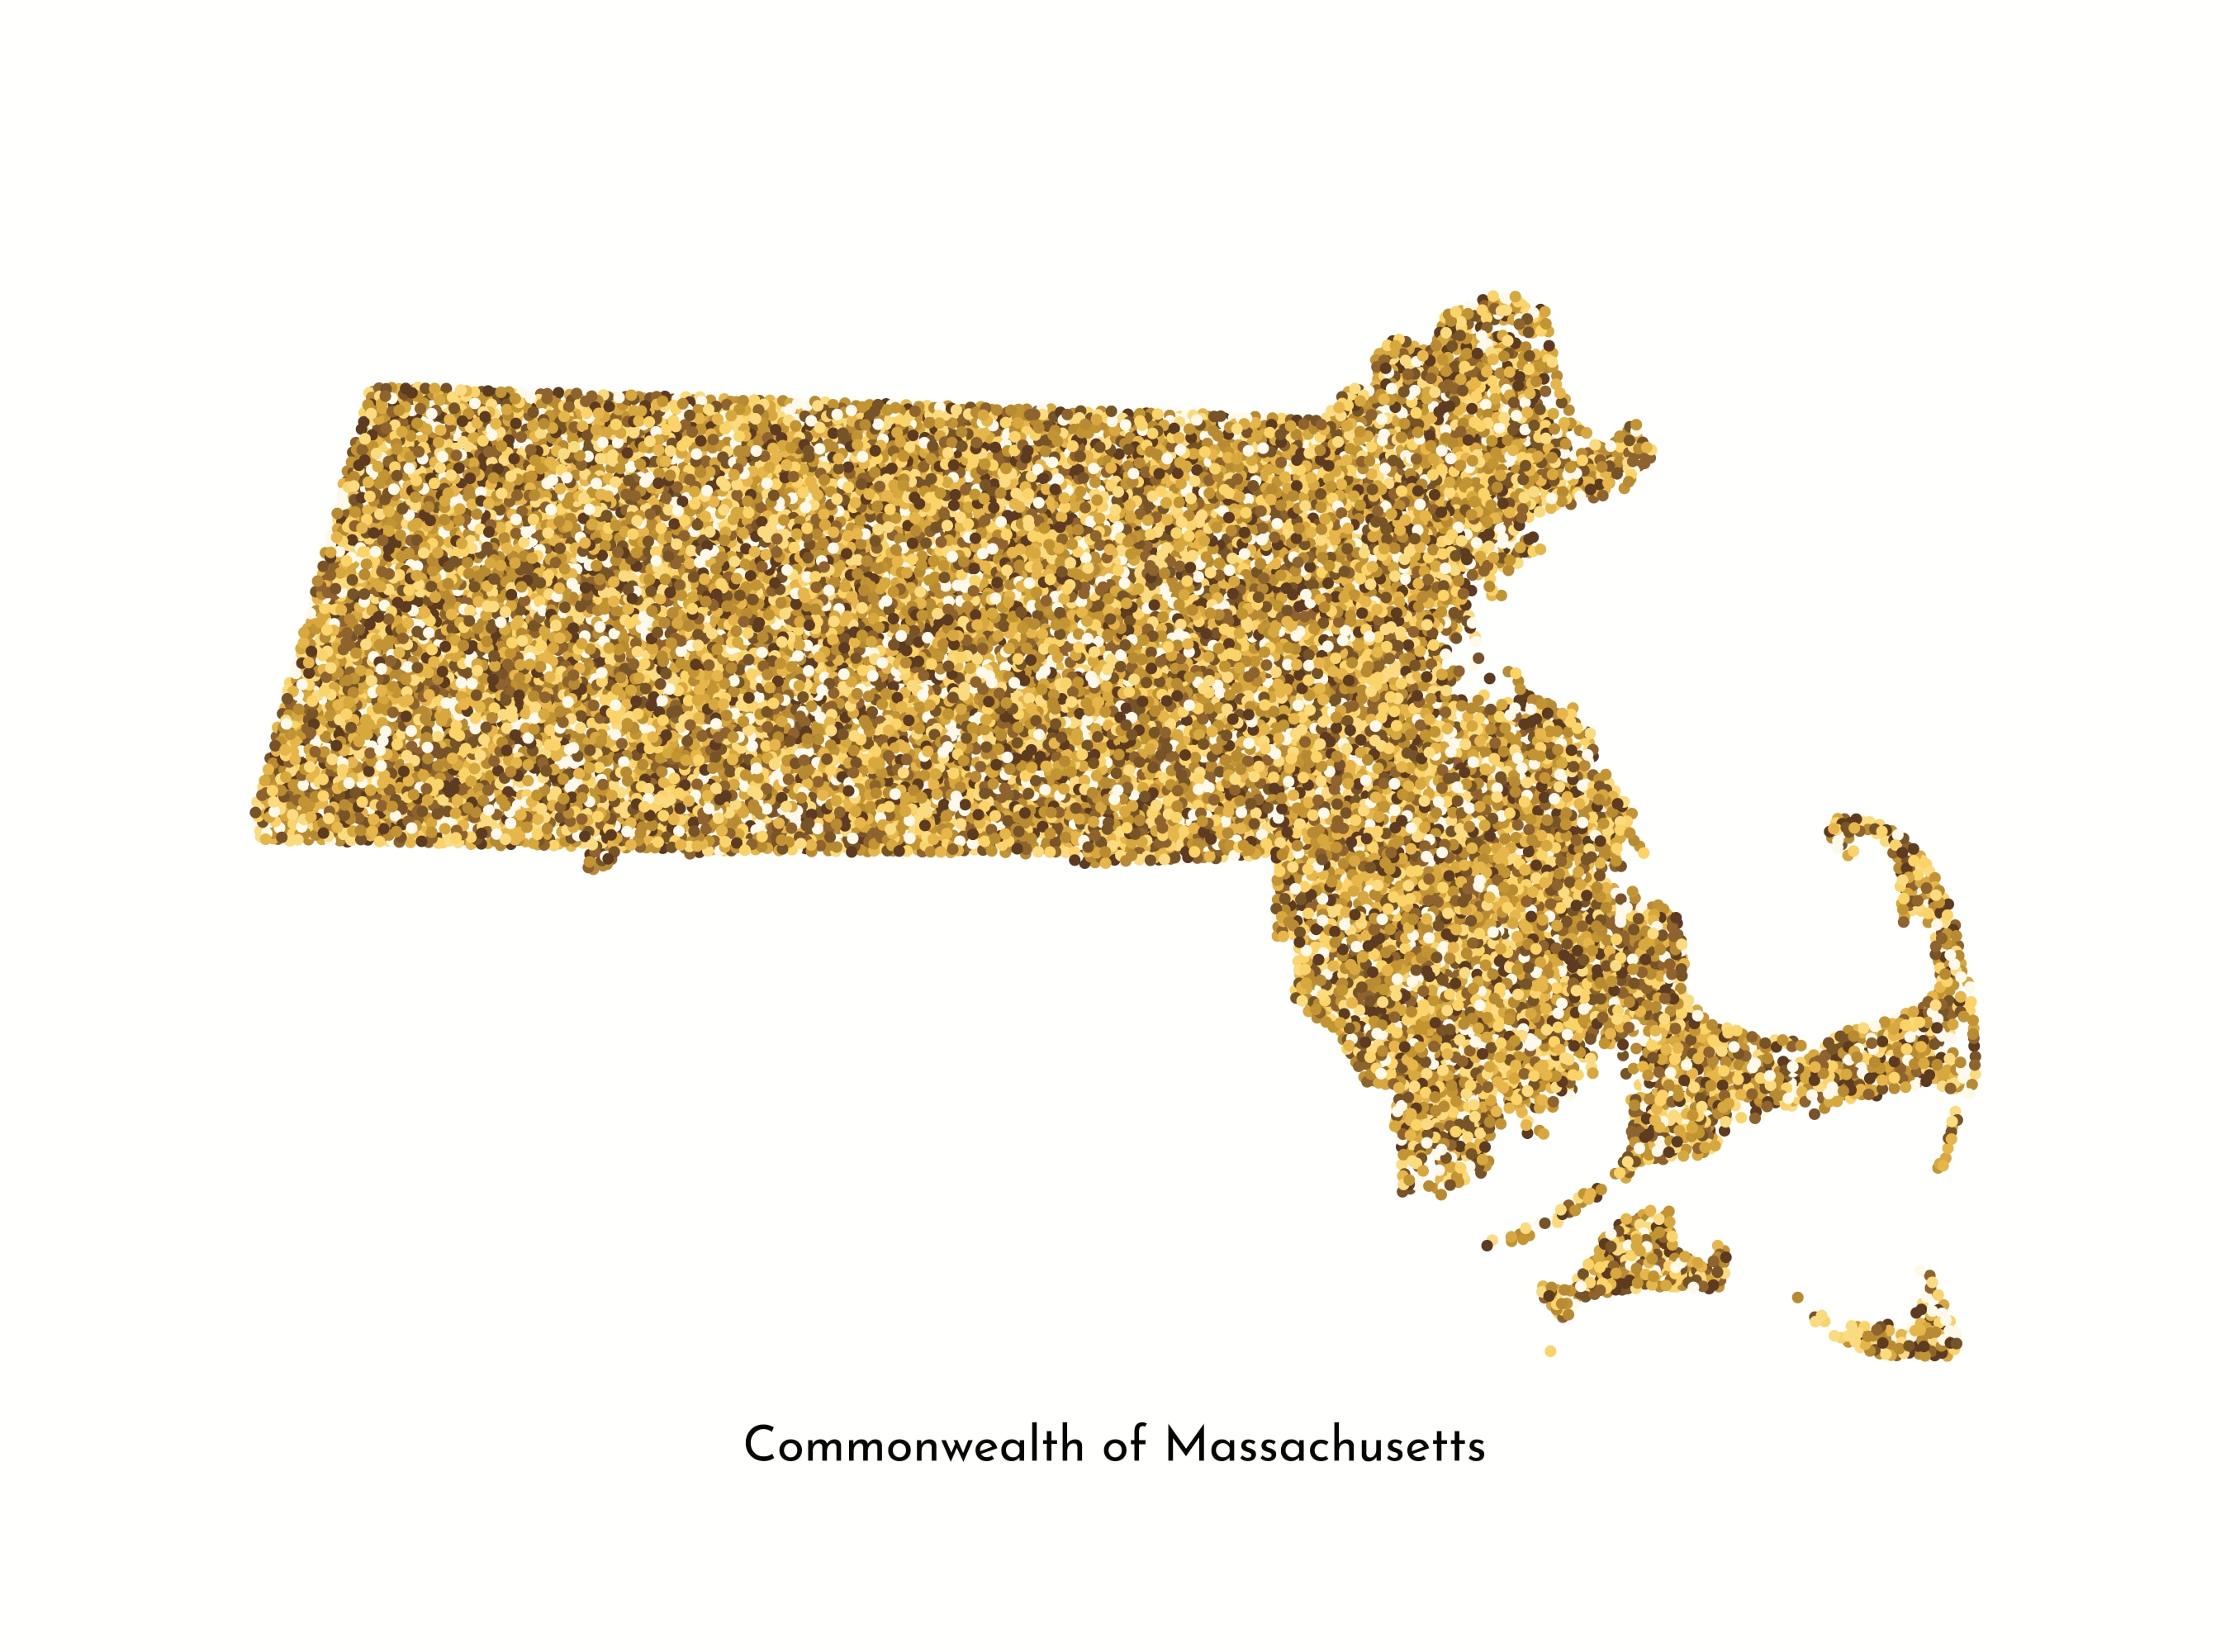 A picture of the outline of the state of Massachusetts